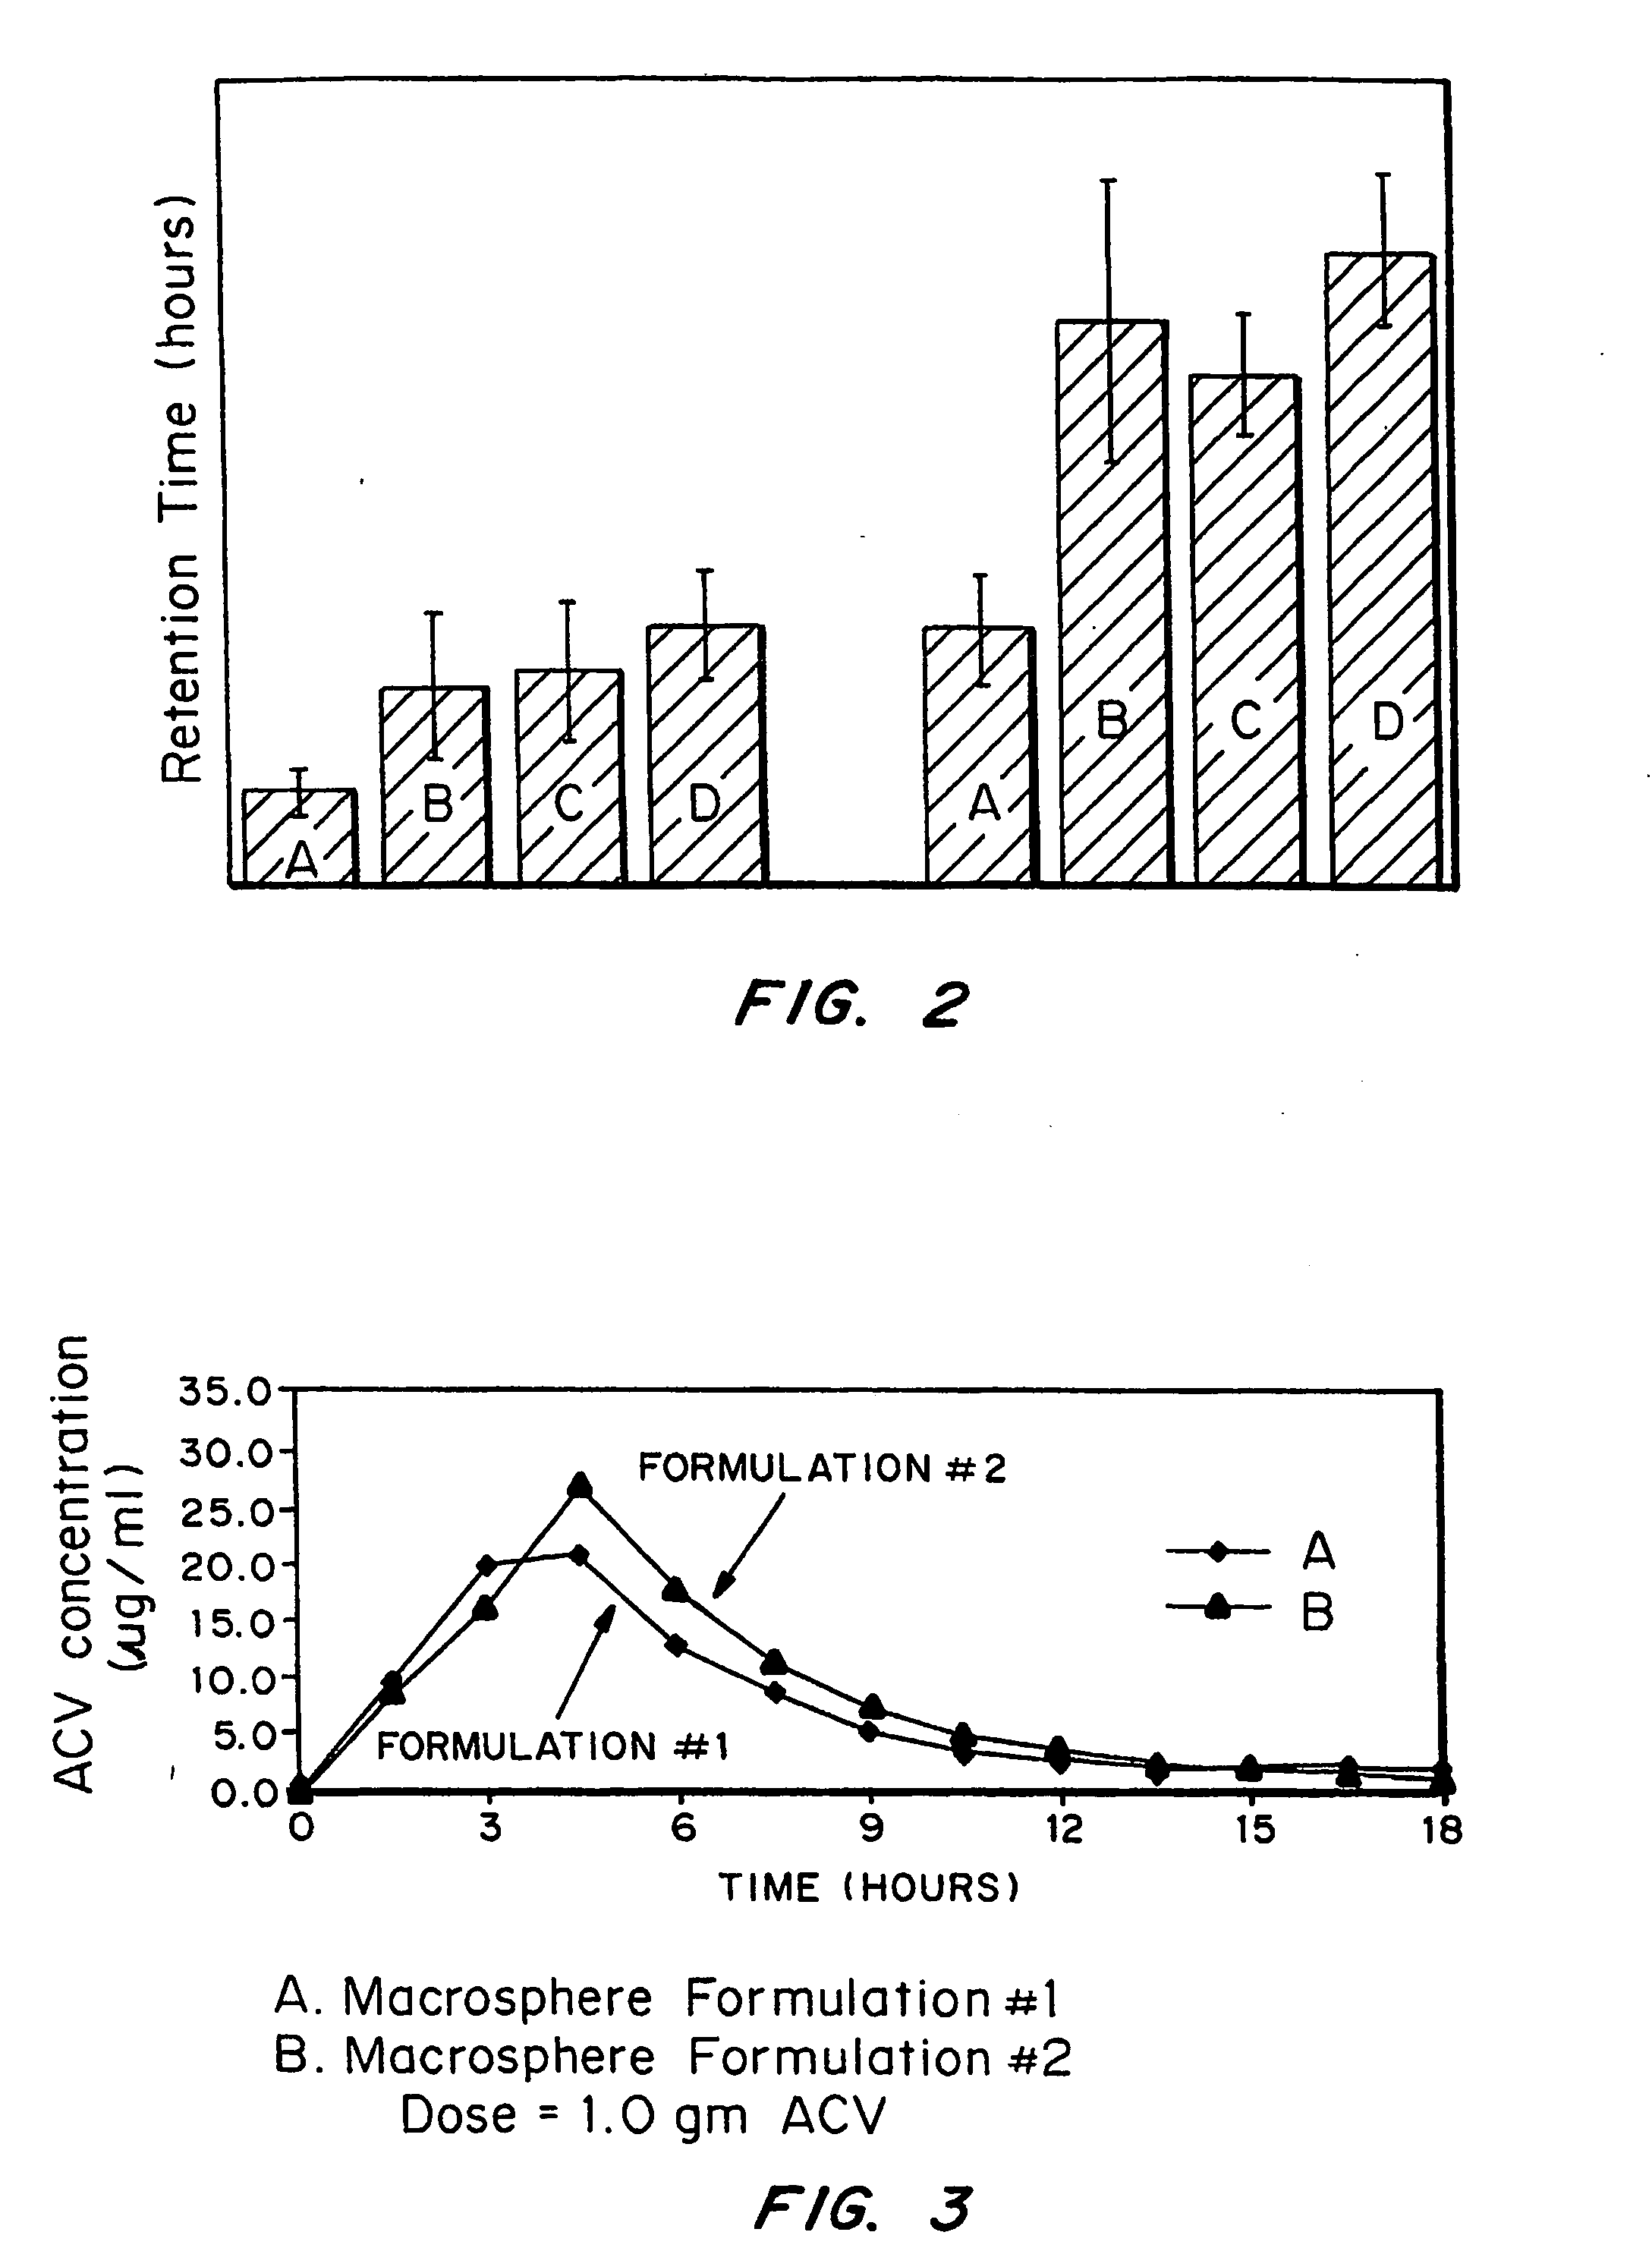 Bioadhesive drug delivery system with enhanced gastric retention